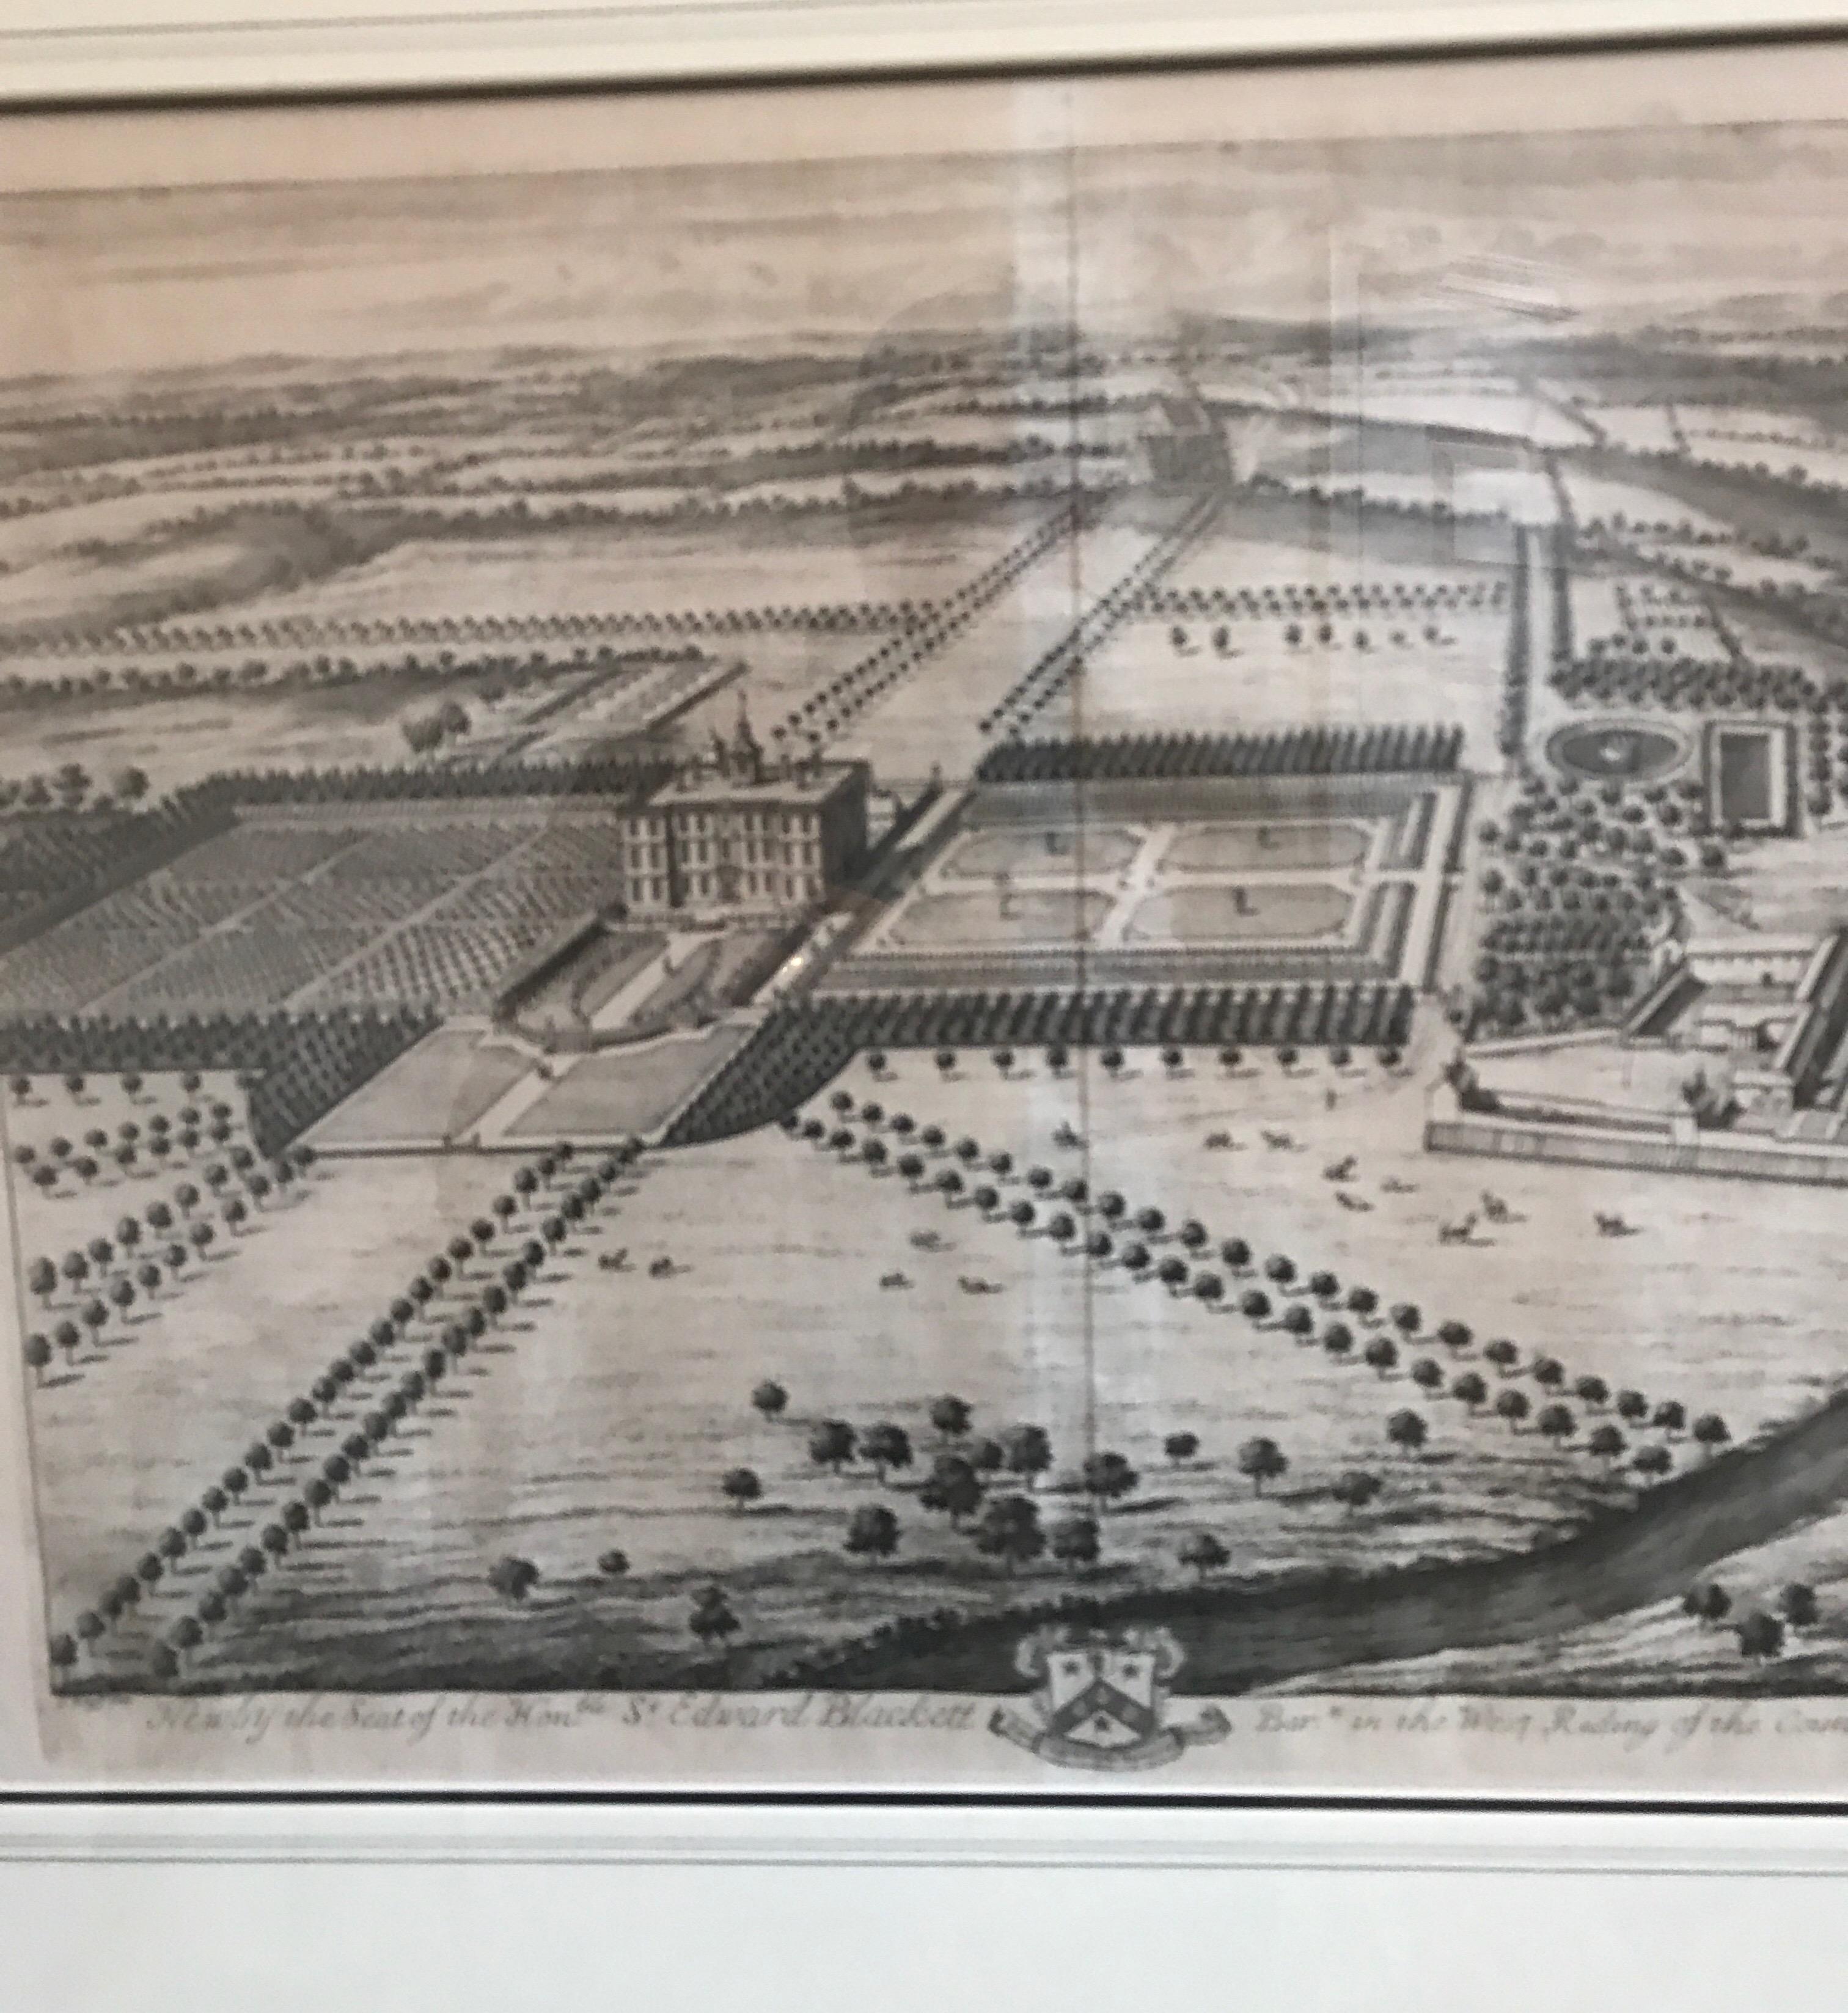 English 18th century engraving of Newby Manor by Johannes Kip.
Kip engraved views of the English castles and country houses after
drawings by Leonard Knyft. This work is from Kip's significant series Britannia Illustrata.